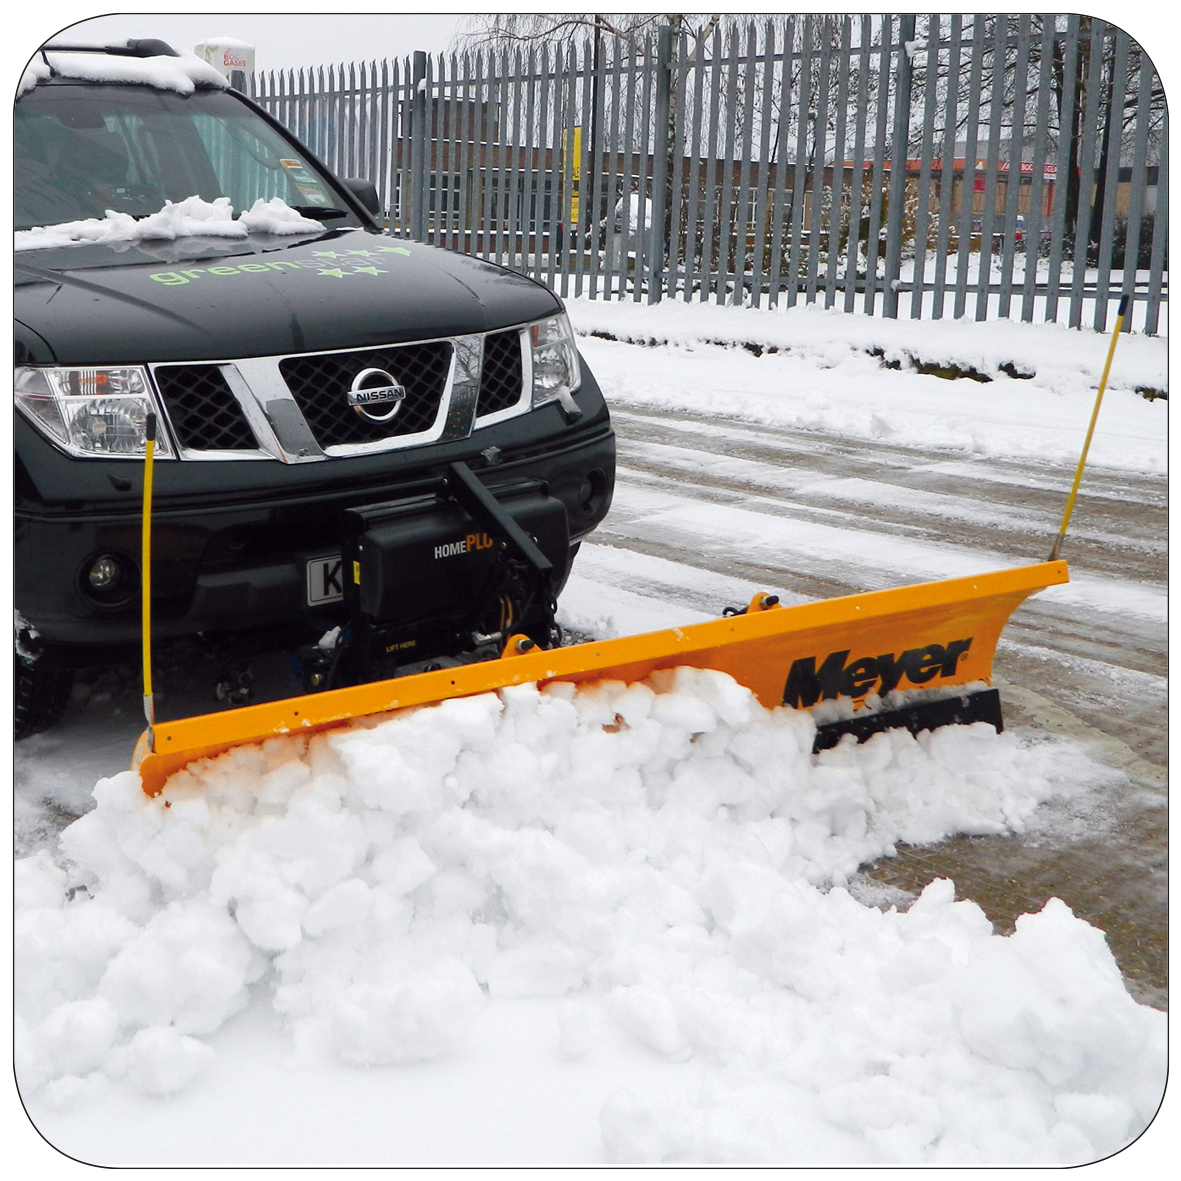 DrivePro Two-point Mount snow plough for Heavy Duty for 4x4s. anc Commercial vehicles over 3500Kg